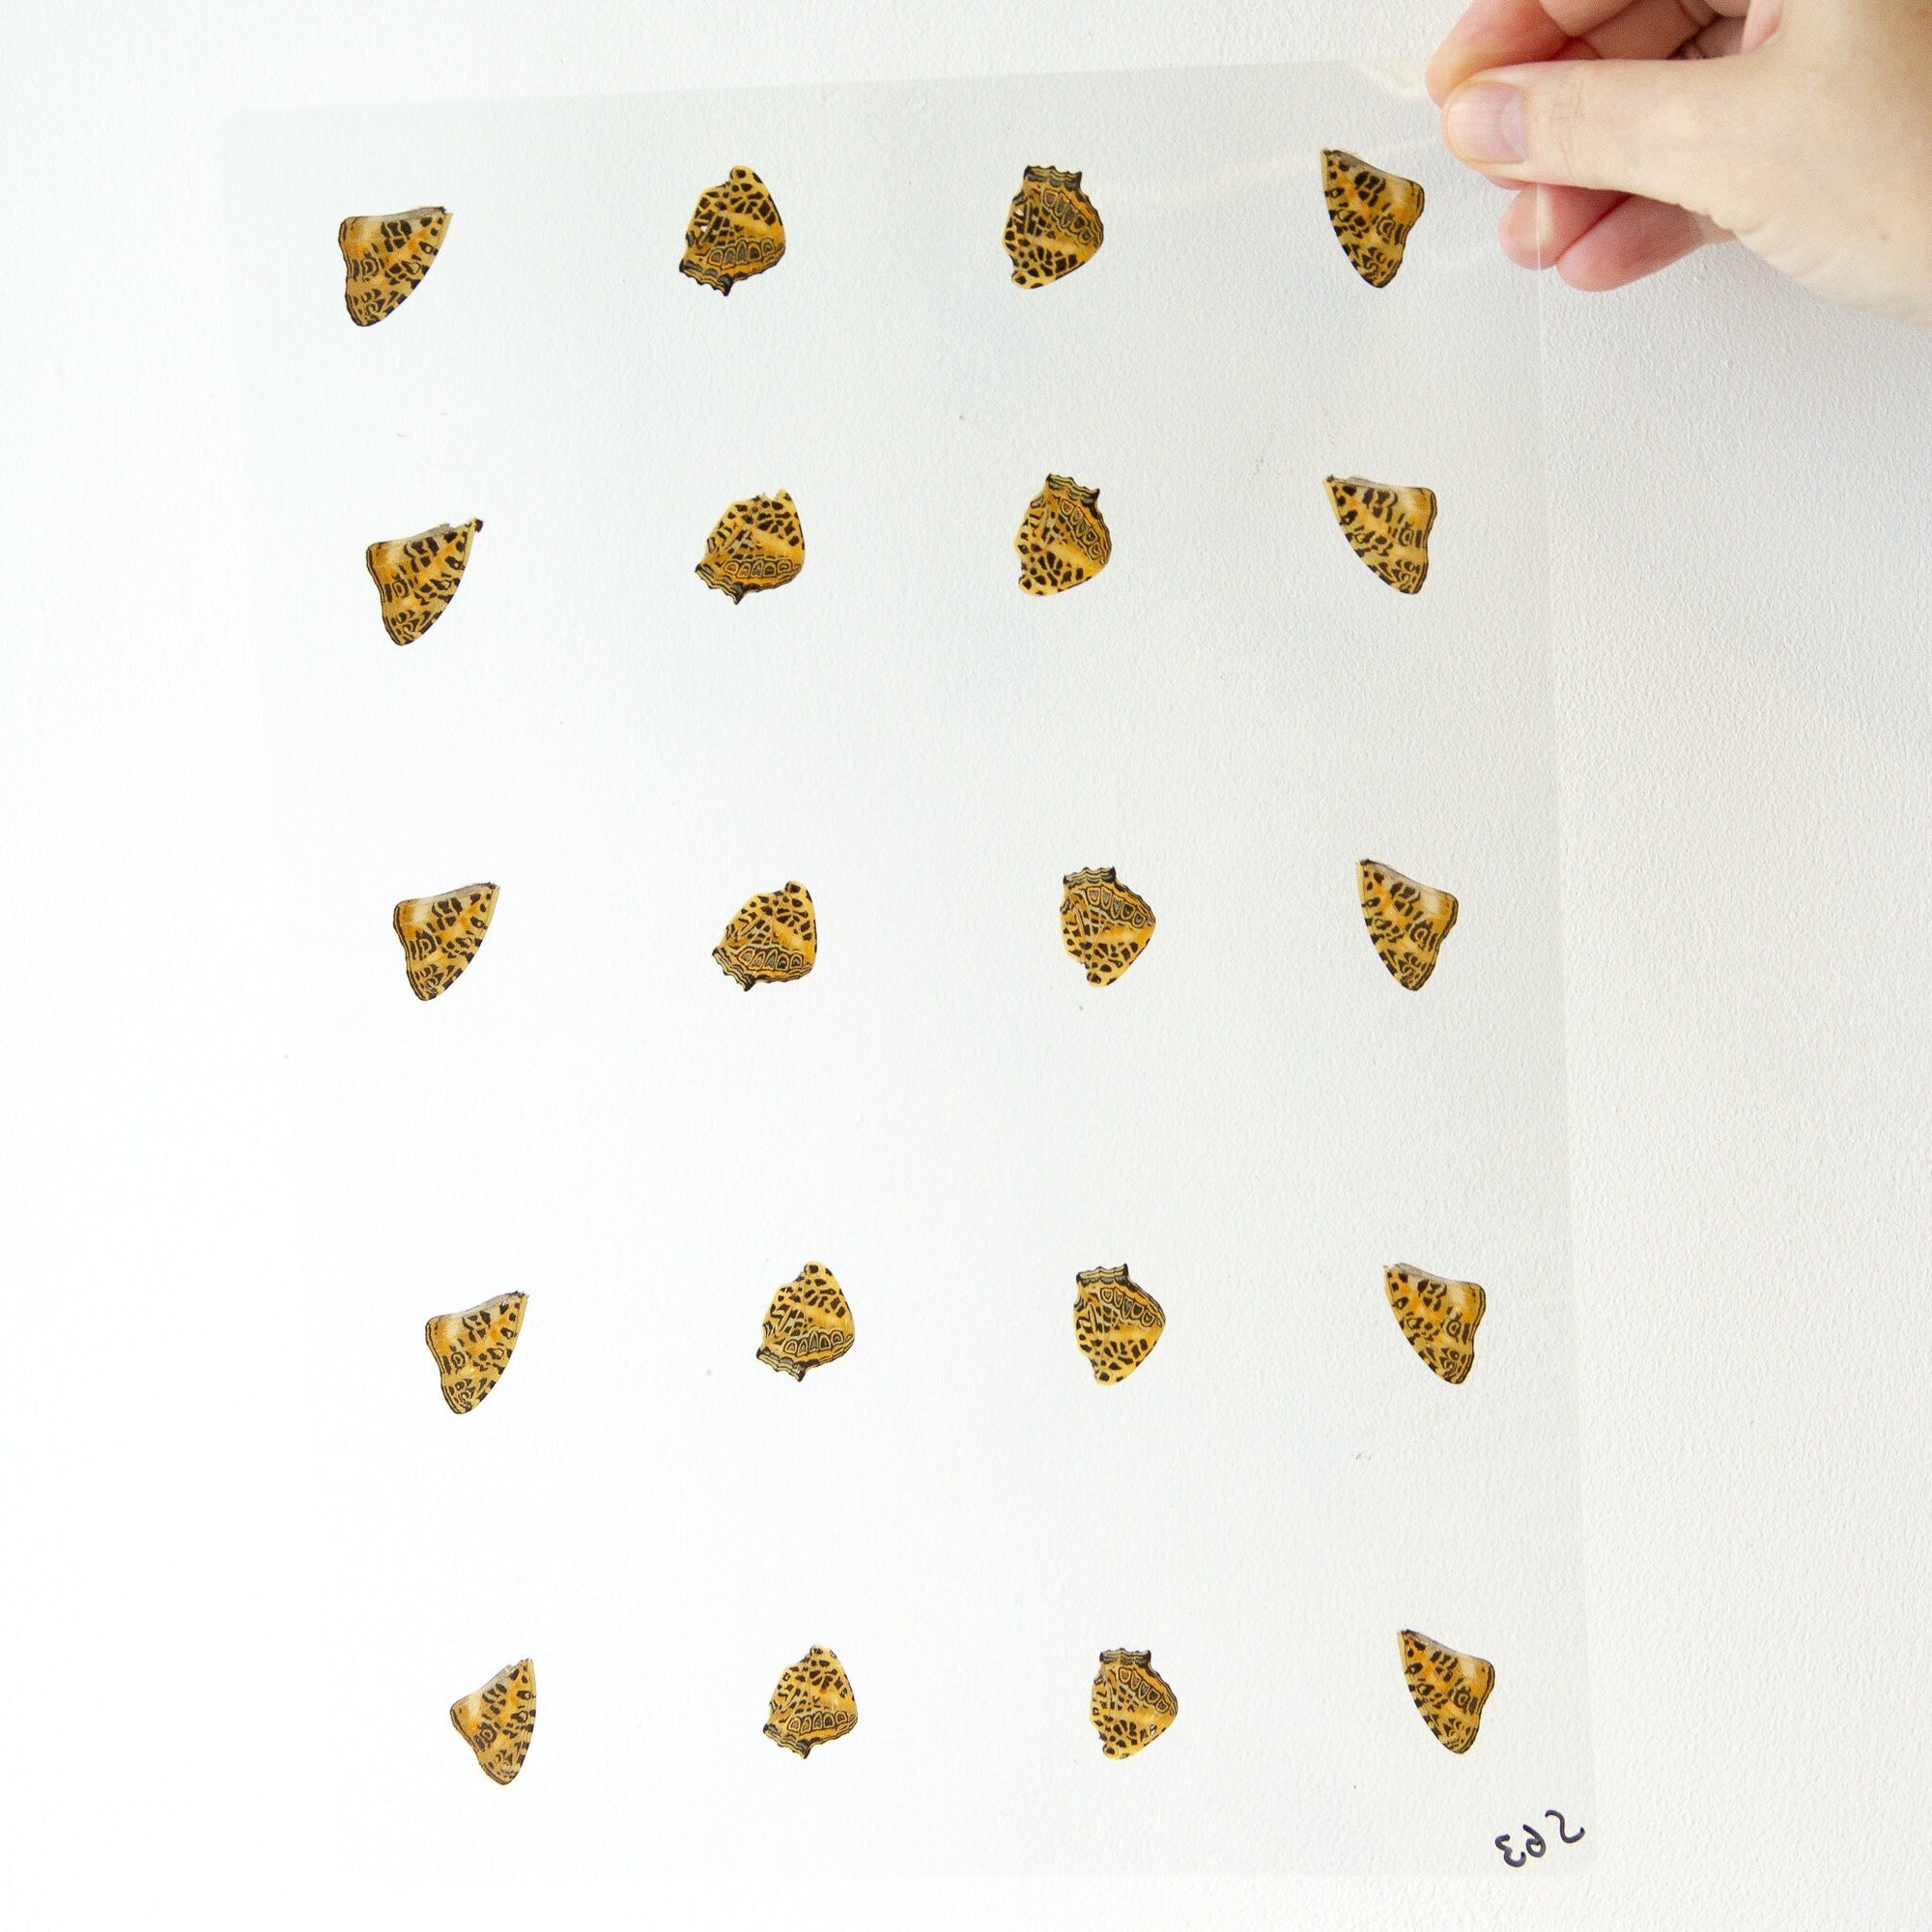 Butterfly Wings GLOSSY LAMINATED SHEET Real Ethically Sourced Specimens Moths Butterflies Wings for Art -- S63